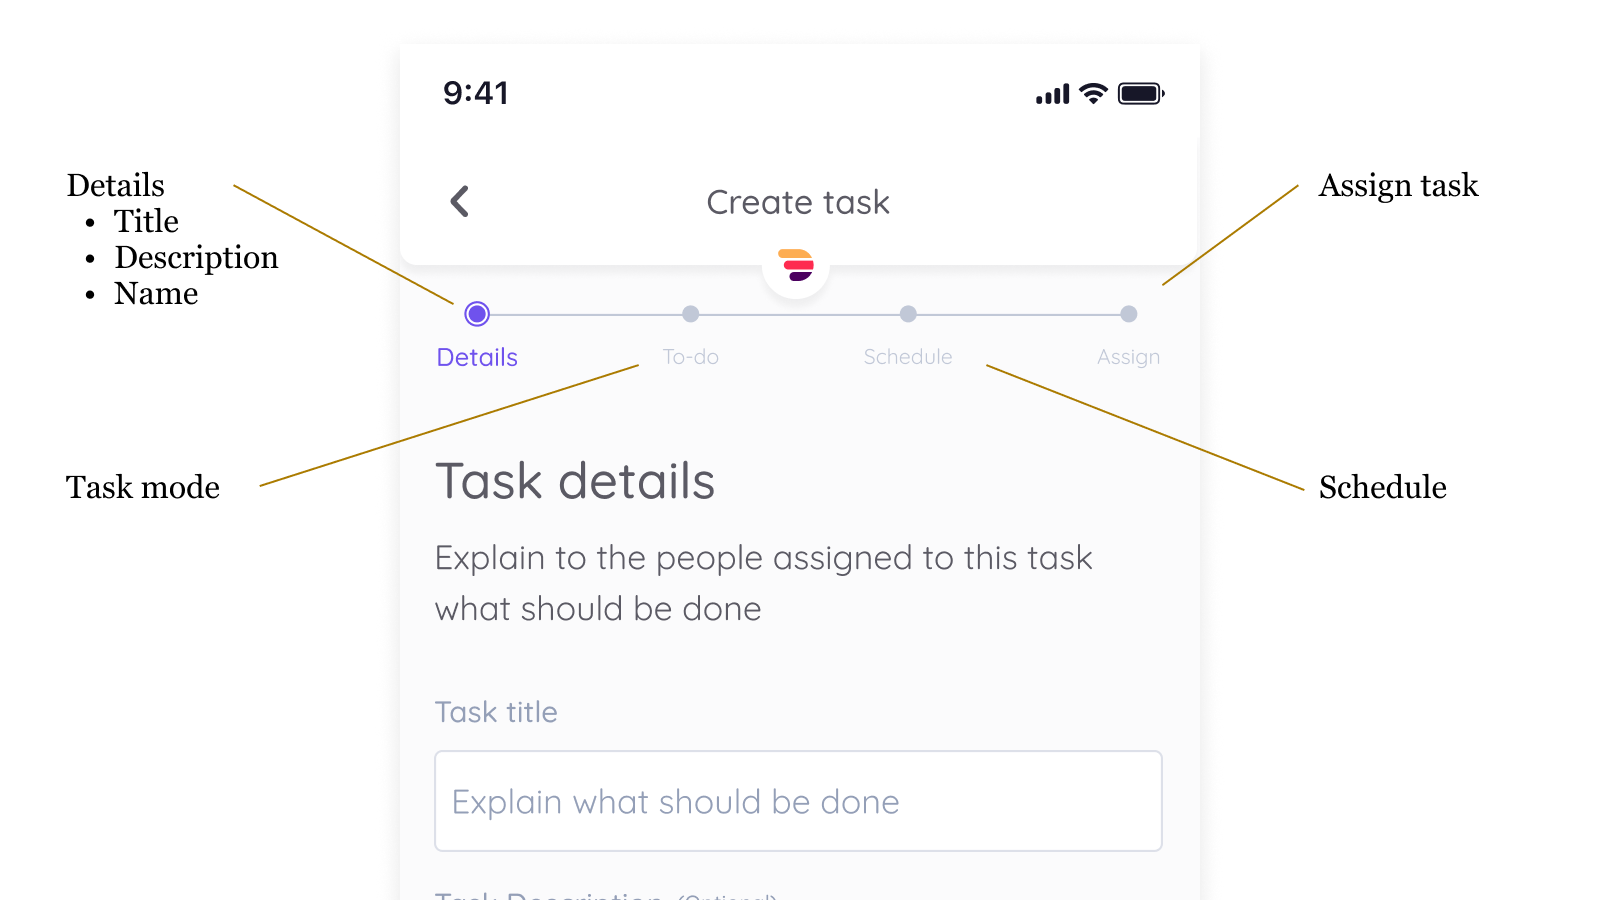 Step by step process for the task creation flow